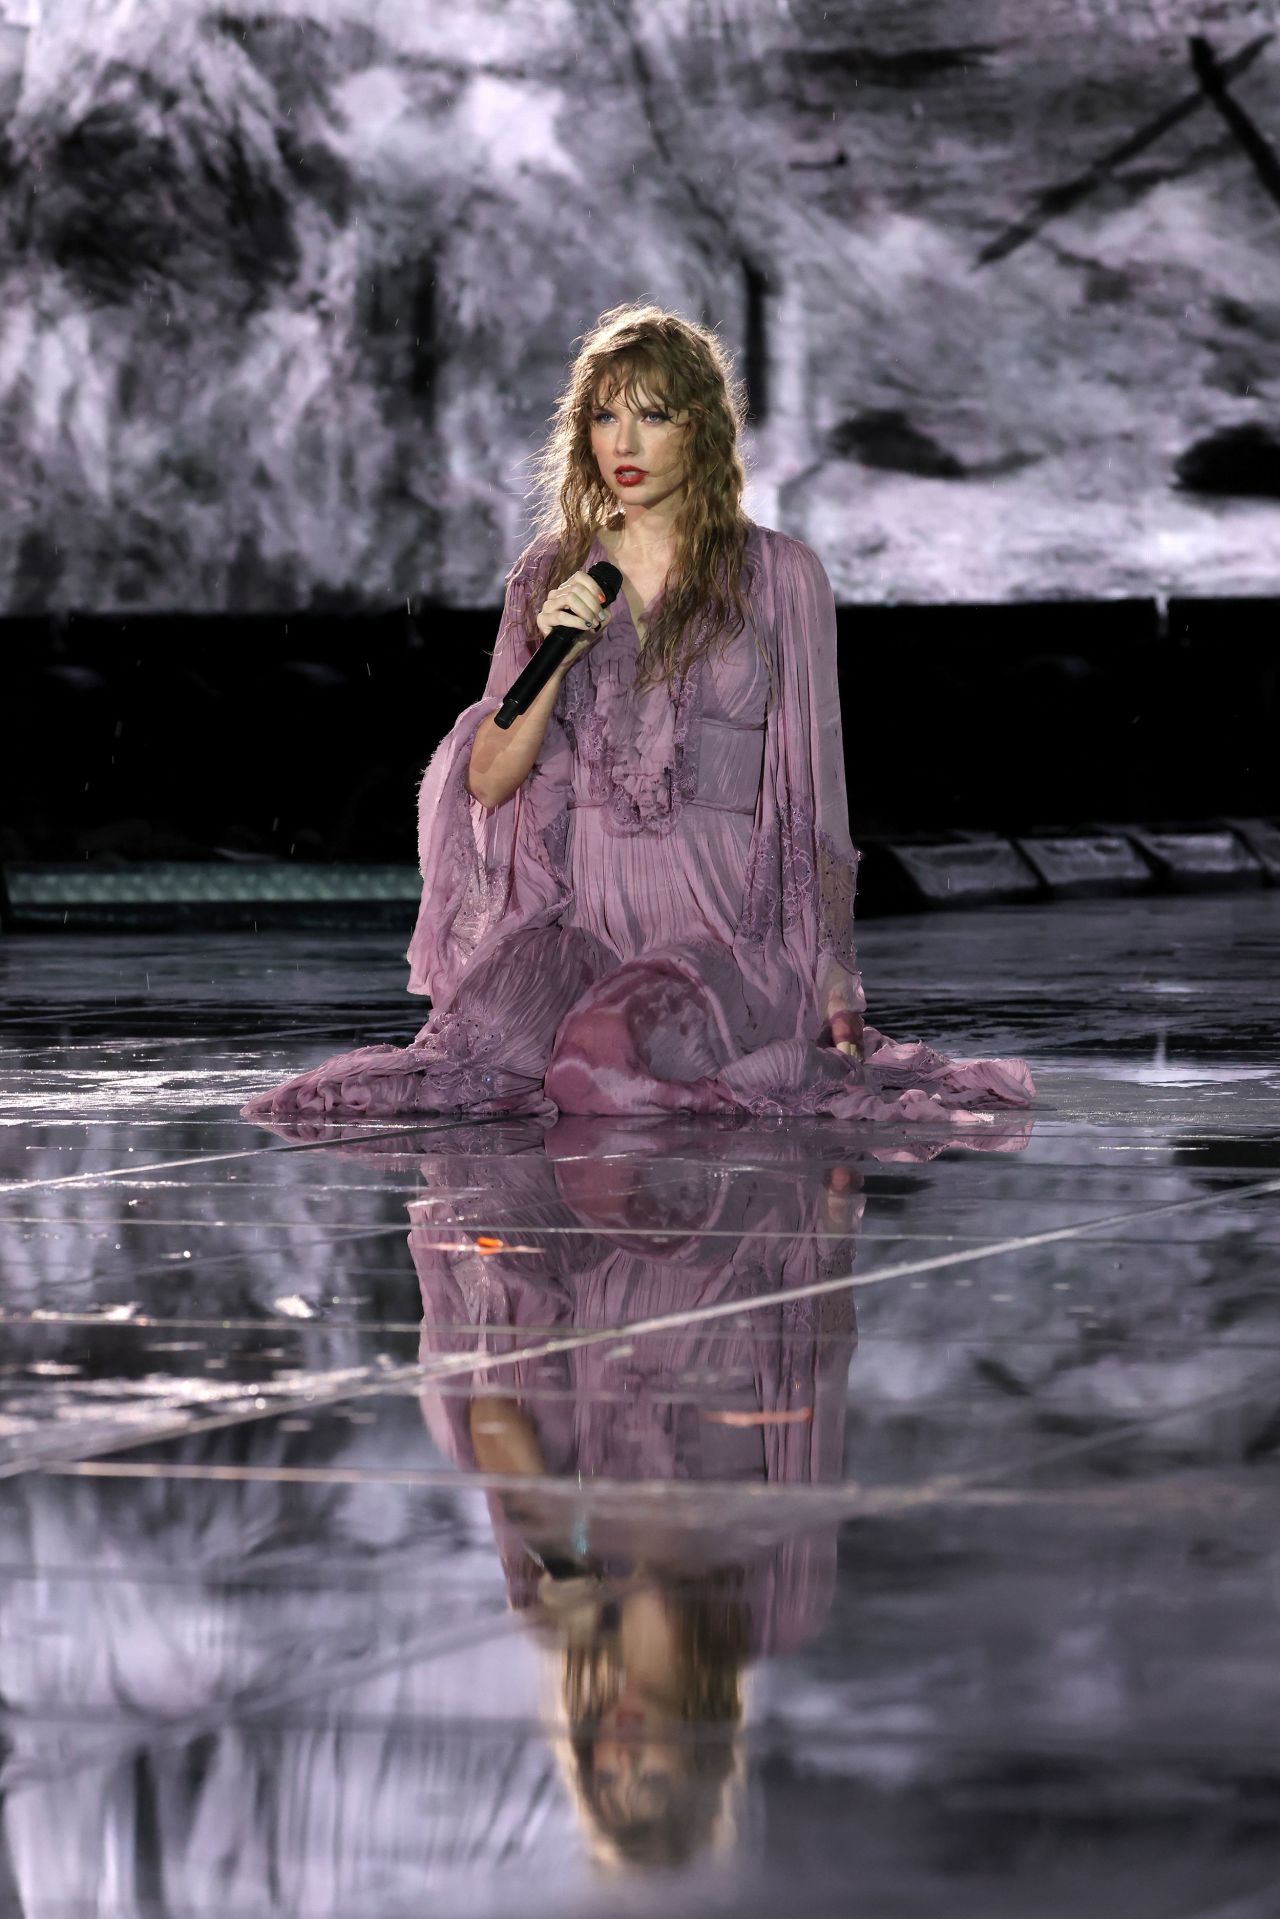 Swift performs the "Folklore" set in the rain in Nashville on May 7. The show was delayed several hours due to storms in the area.